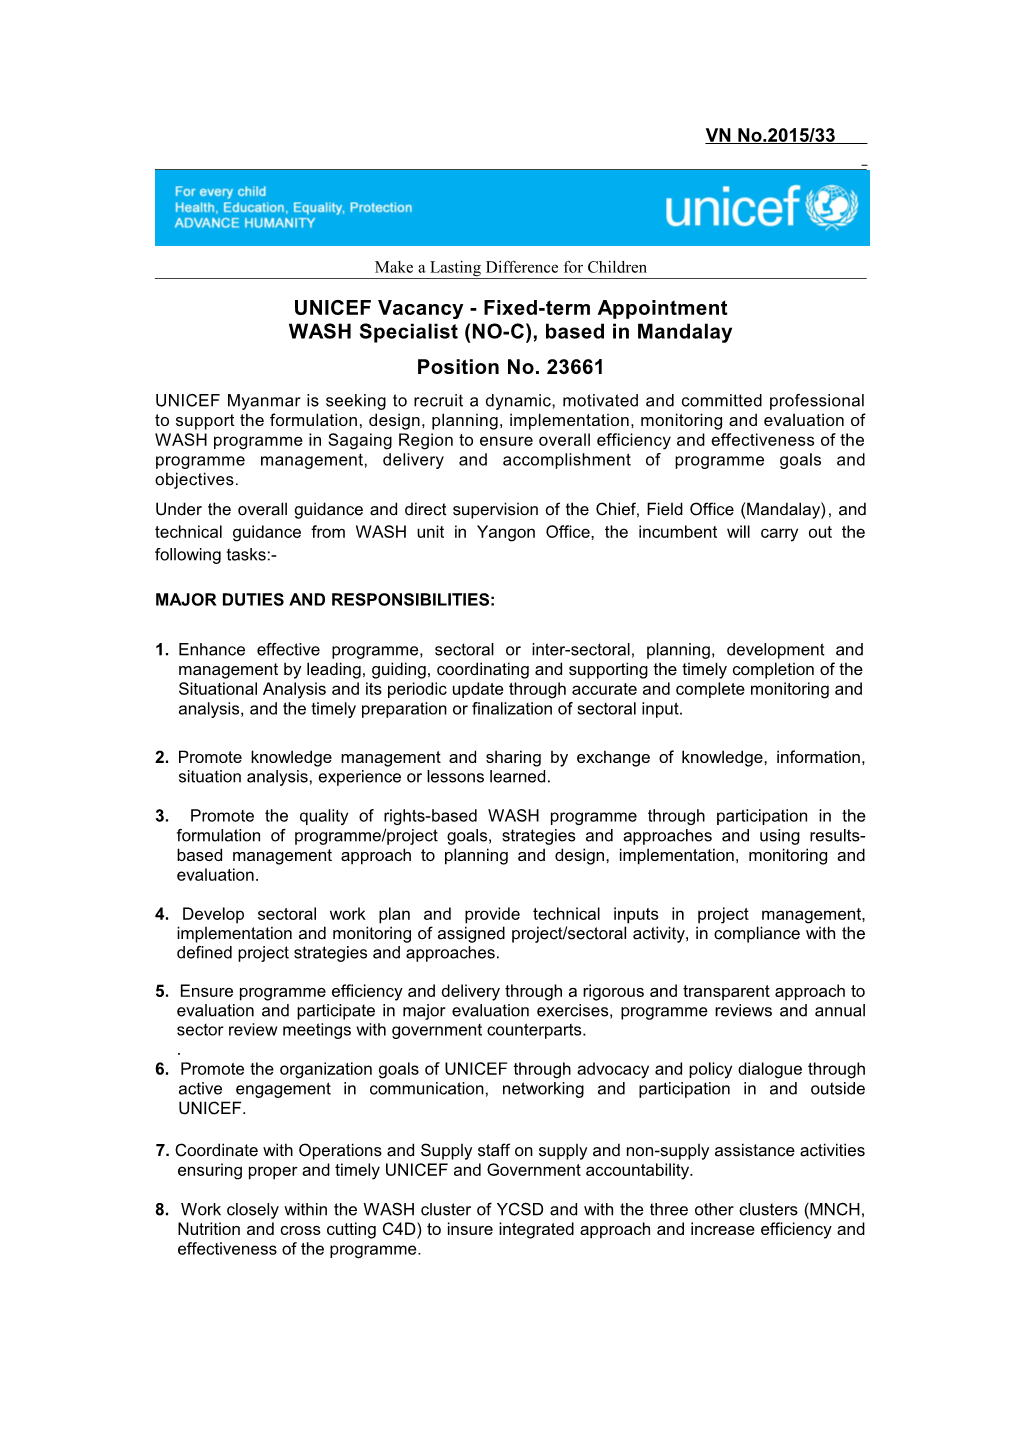 UNICEF Vacancy - Fixed-Term Appointment